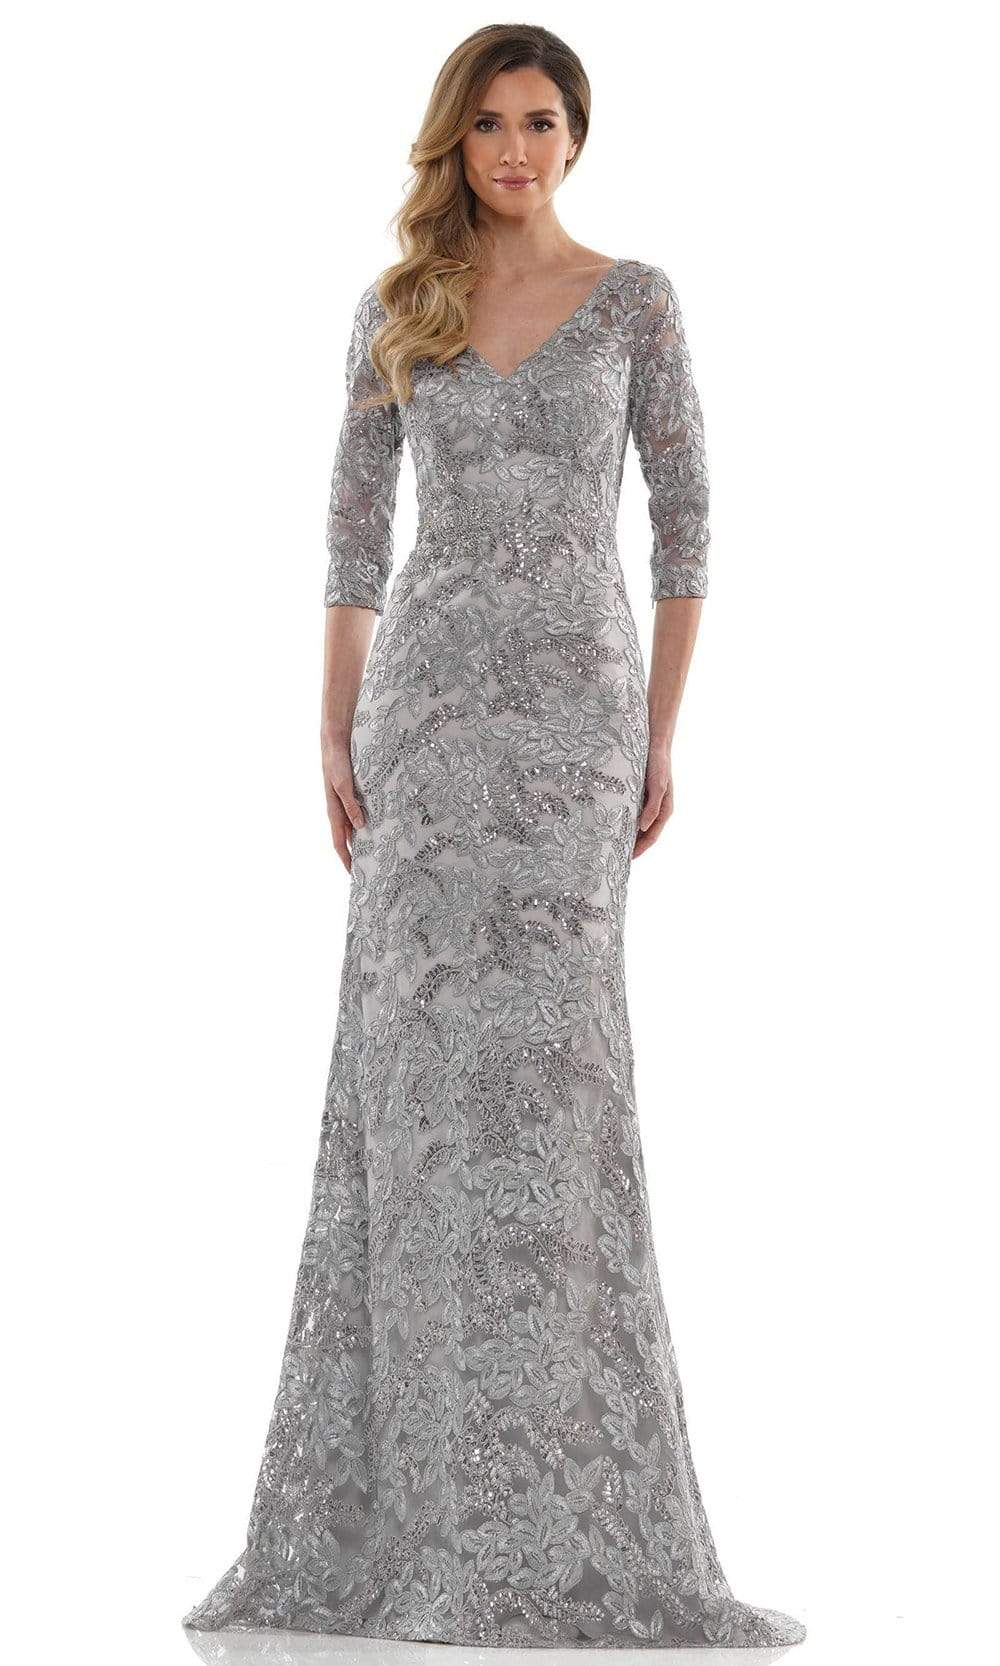 Marsoni by Colors - MV1119 Sequin and Embroidered Sheath Dress Mother of the Bride Dresses 6 / Silver